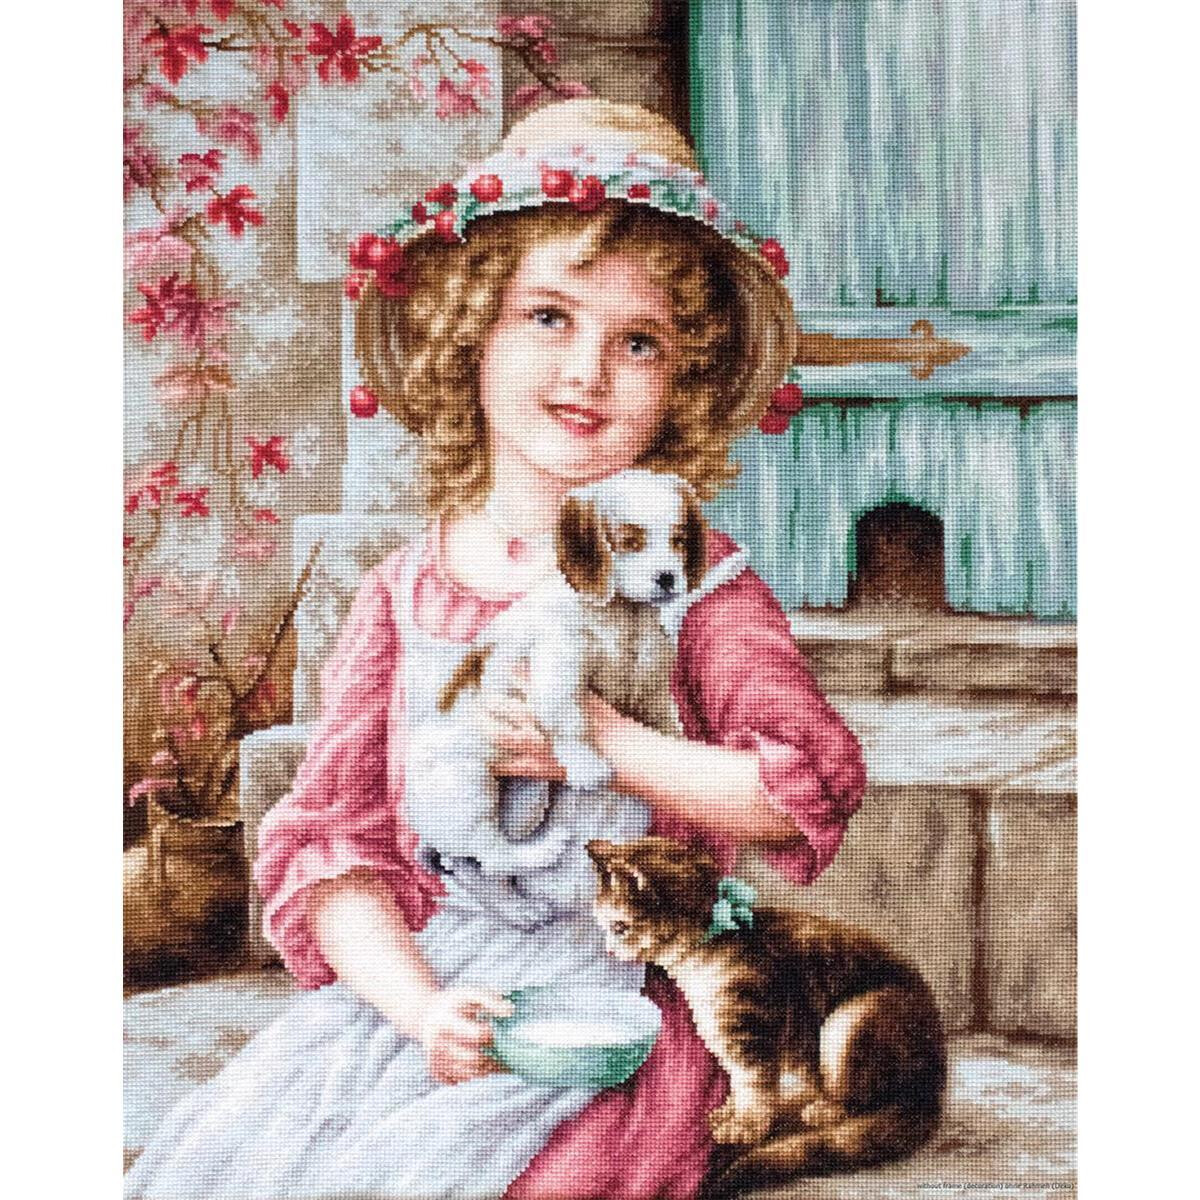 Luca-S counted Cross Stitch kit "Best of Friends...